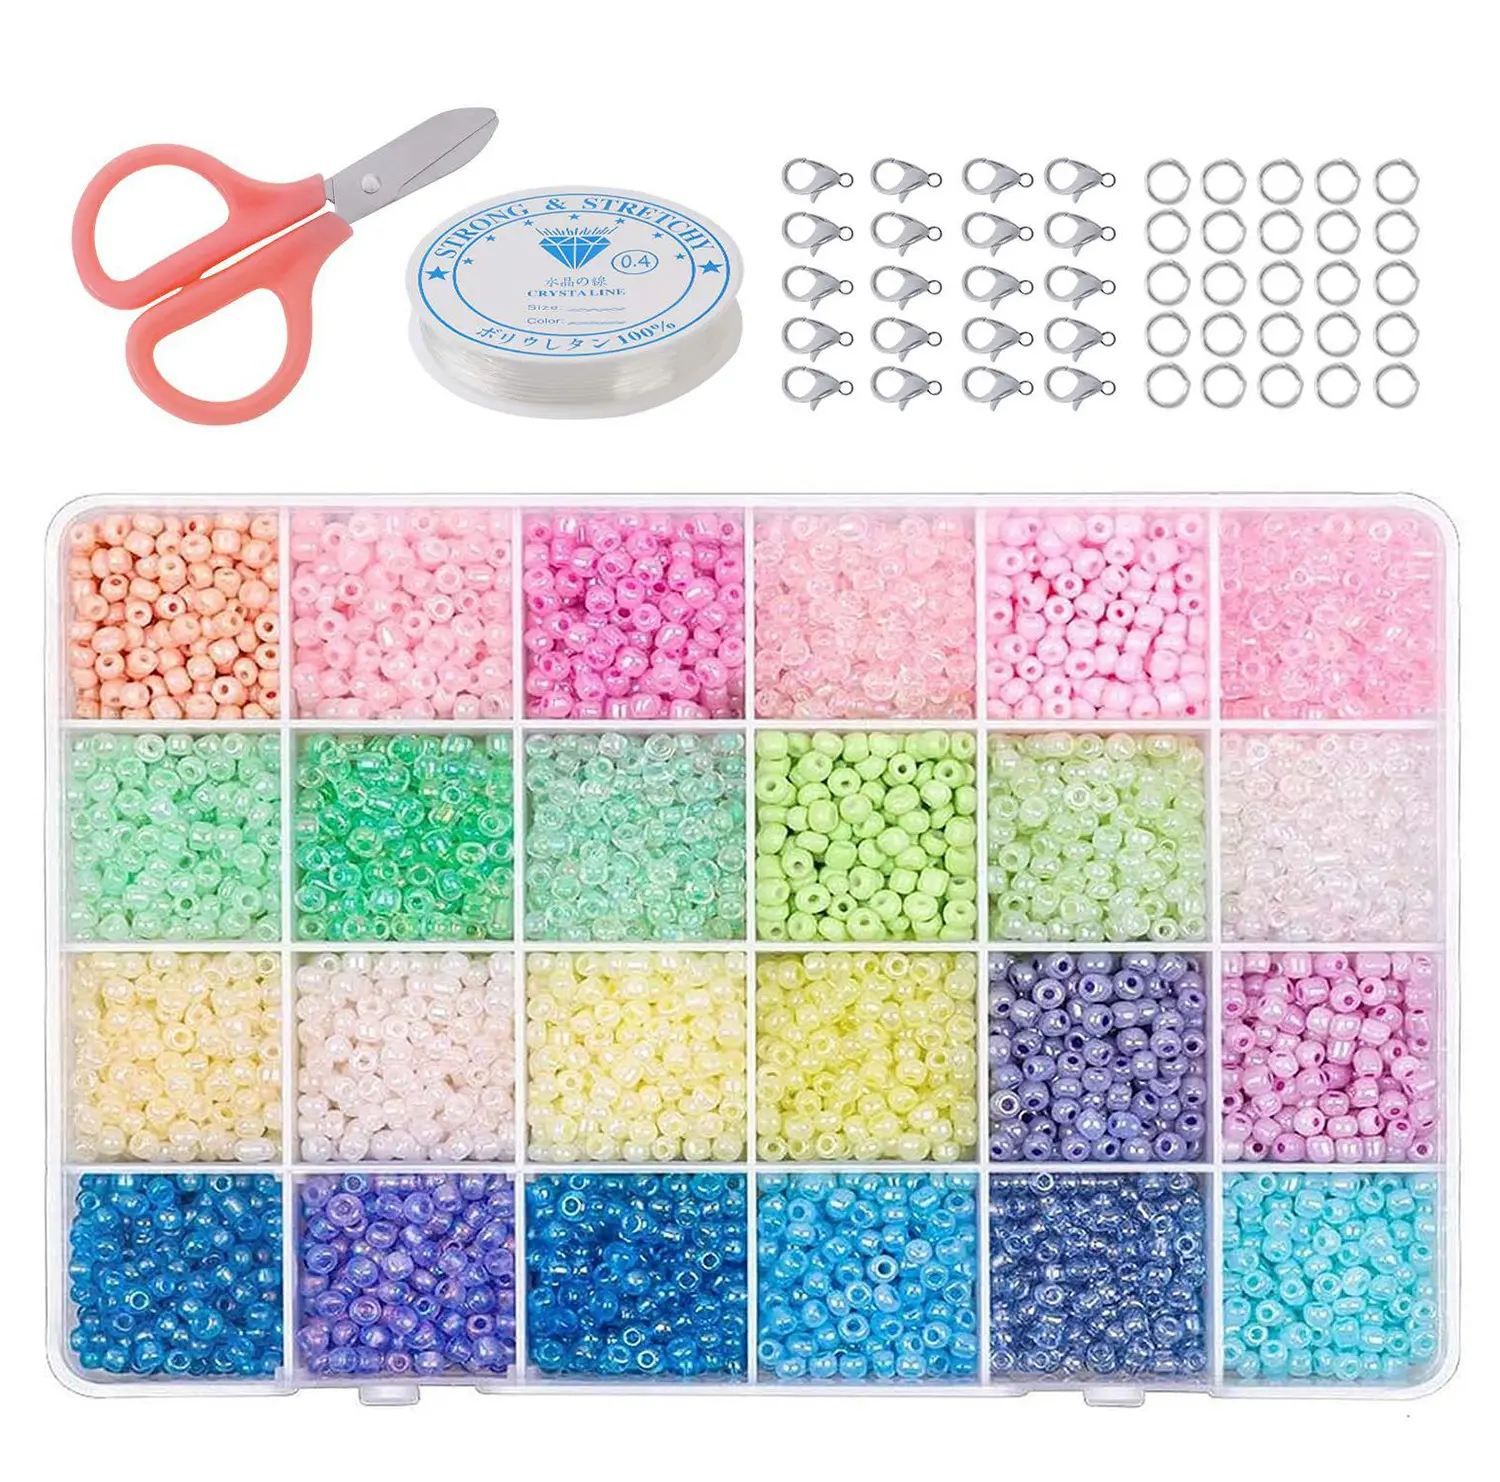 24 color 2MM 3MM Glass seed Beads for Jewelry Making Kit Cream Transparent Millet Beads DIYJewelry Making Accessories